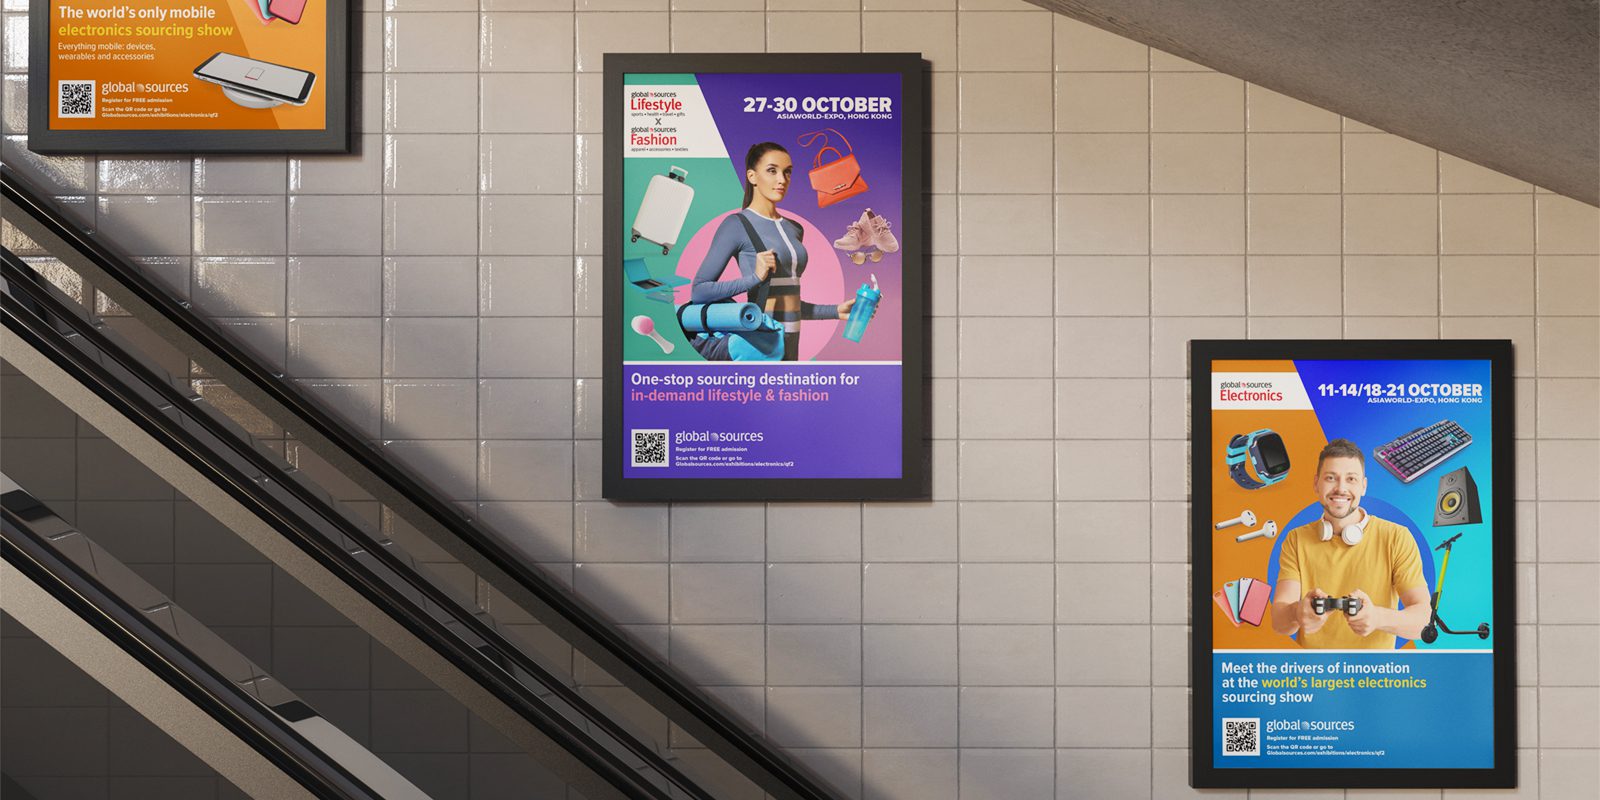 Global Souces Marketing Campaign 3 Portrait Poster Displayed Next to Escalator in Underground Station